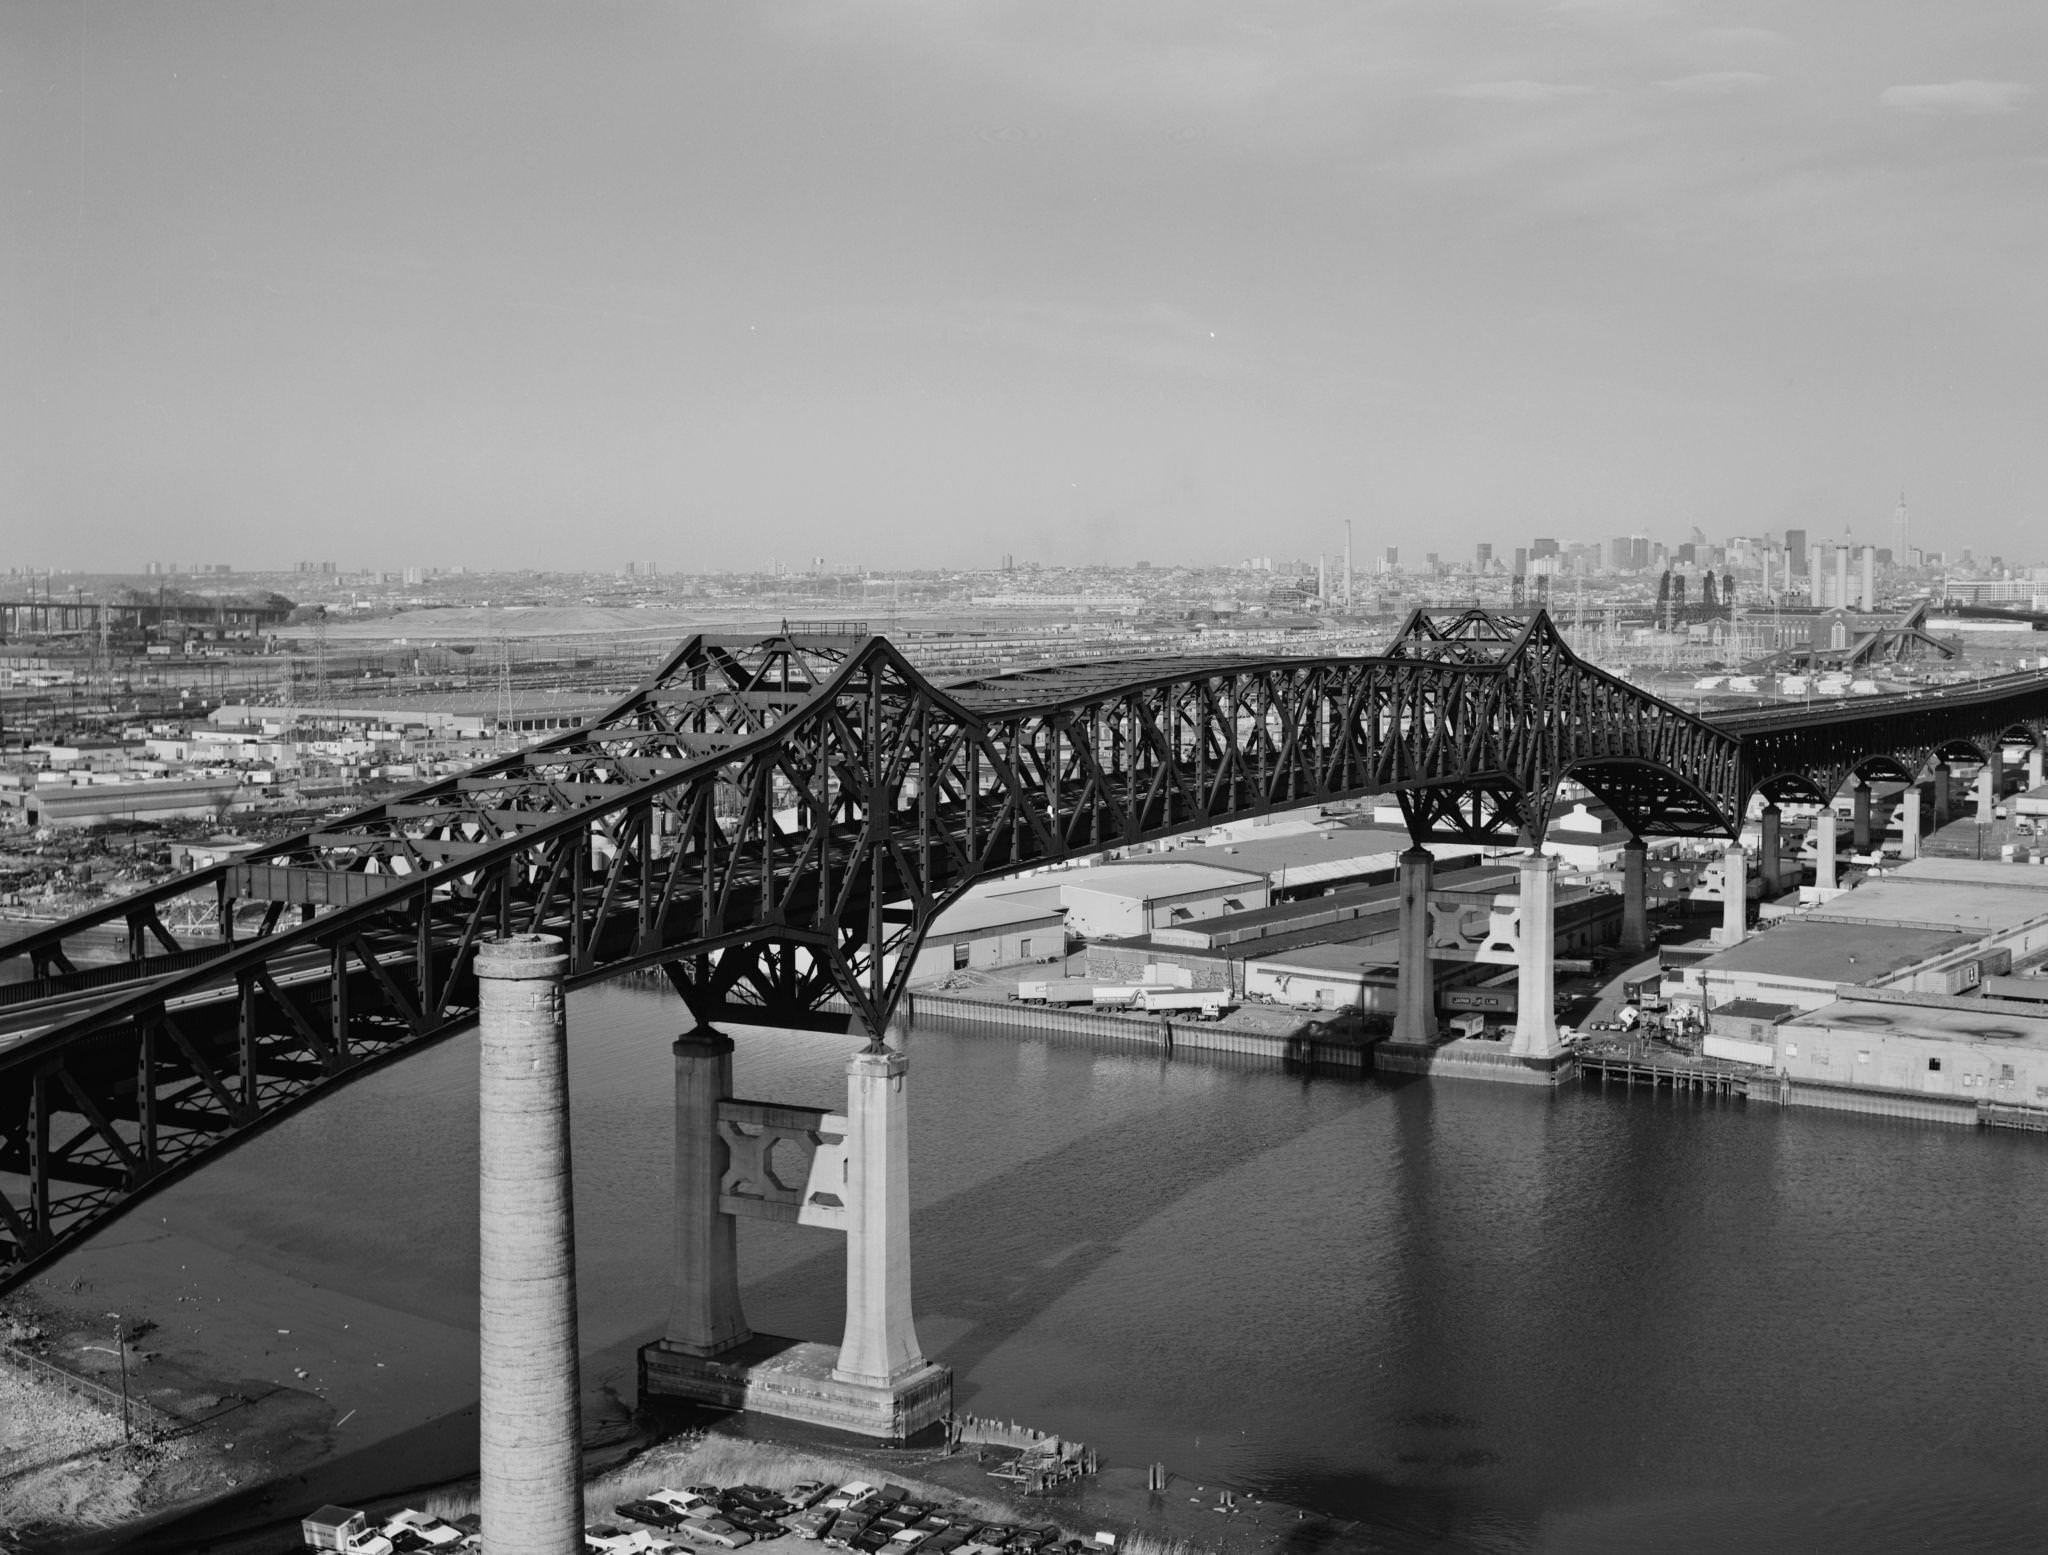 Aerial view looking east over the Pulaski Skyway which spans the Passaic River, Jersey City, New Jersey, 1978.